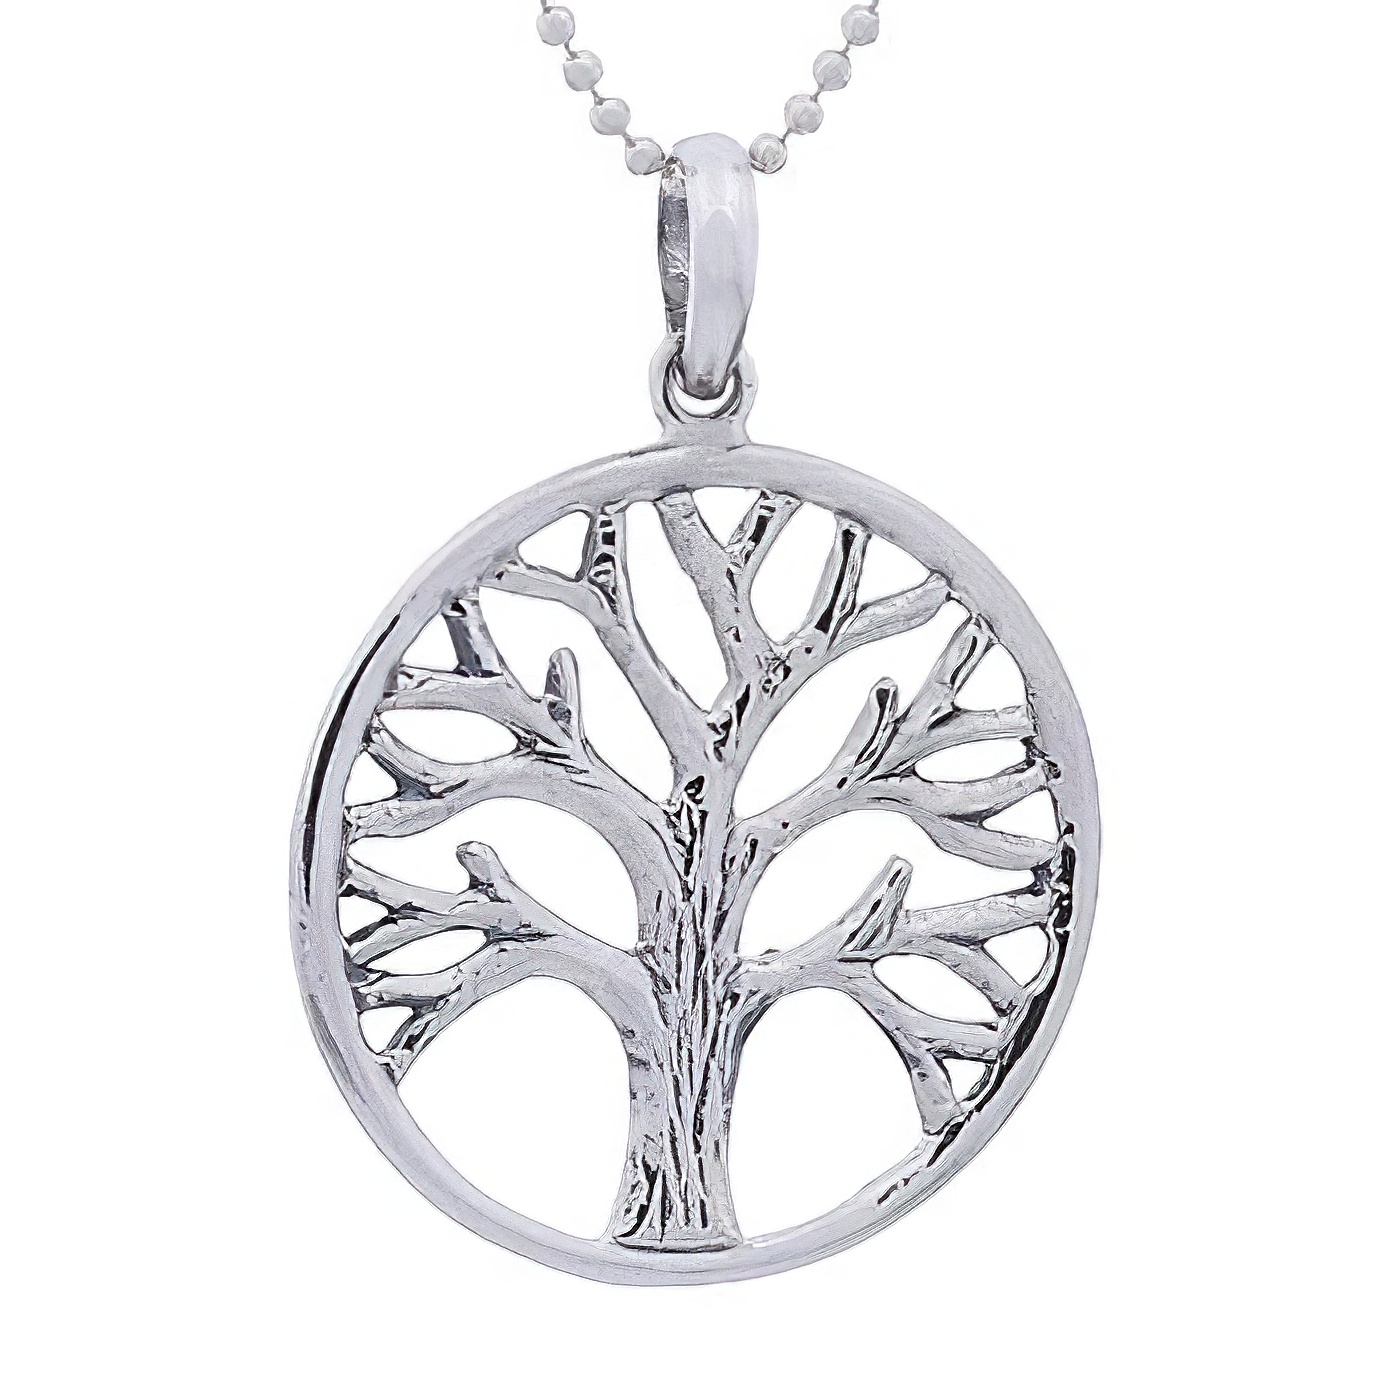 Ajoure rugged style sterling silver tree of life in round frame pendant by BeYindi 